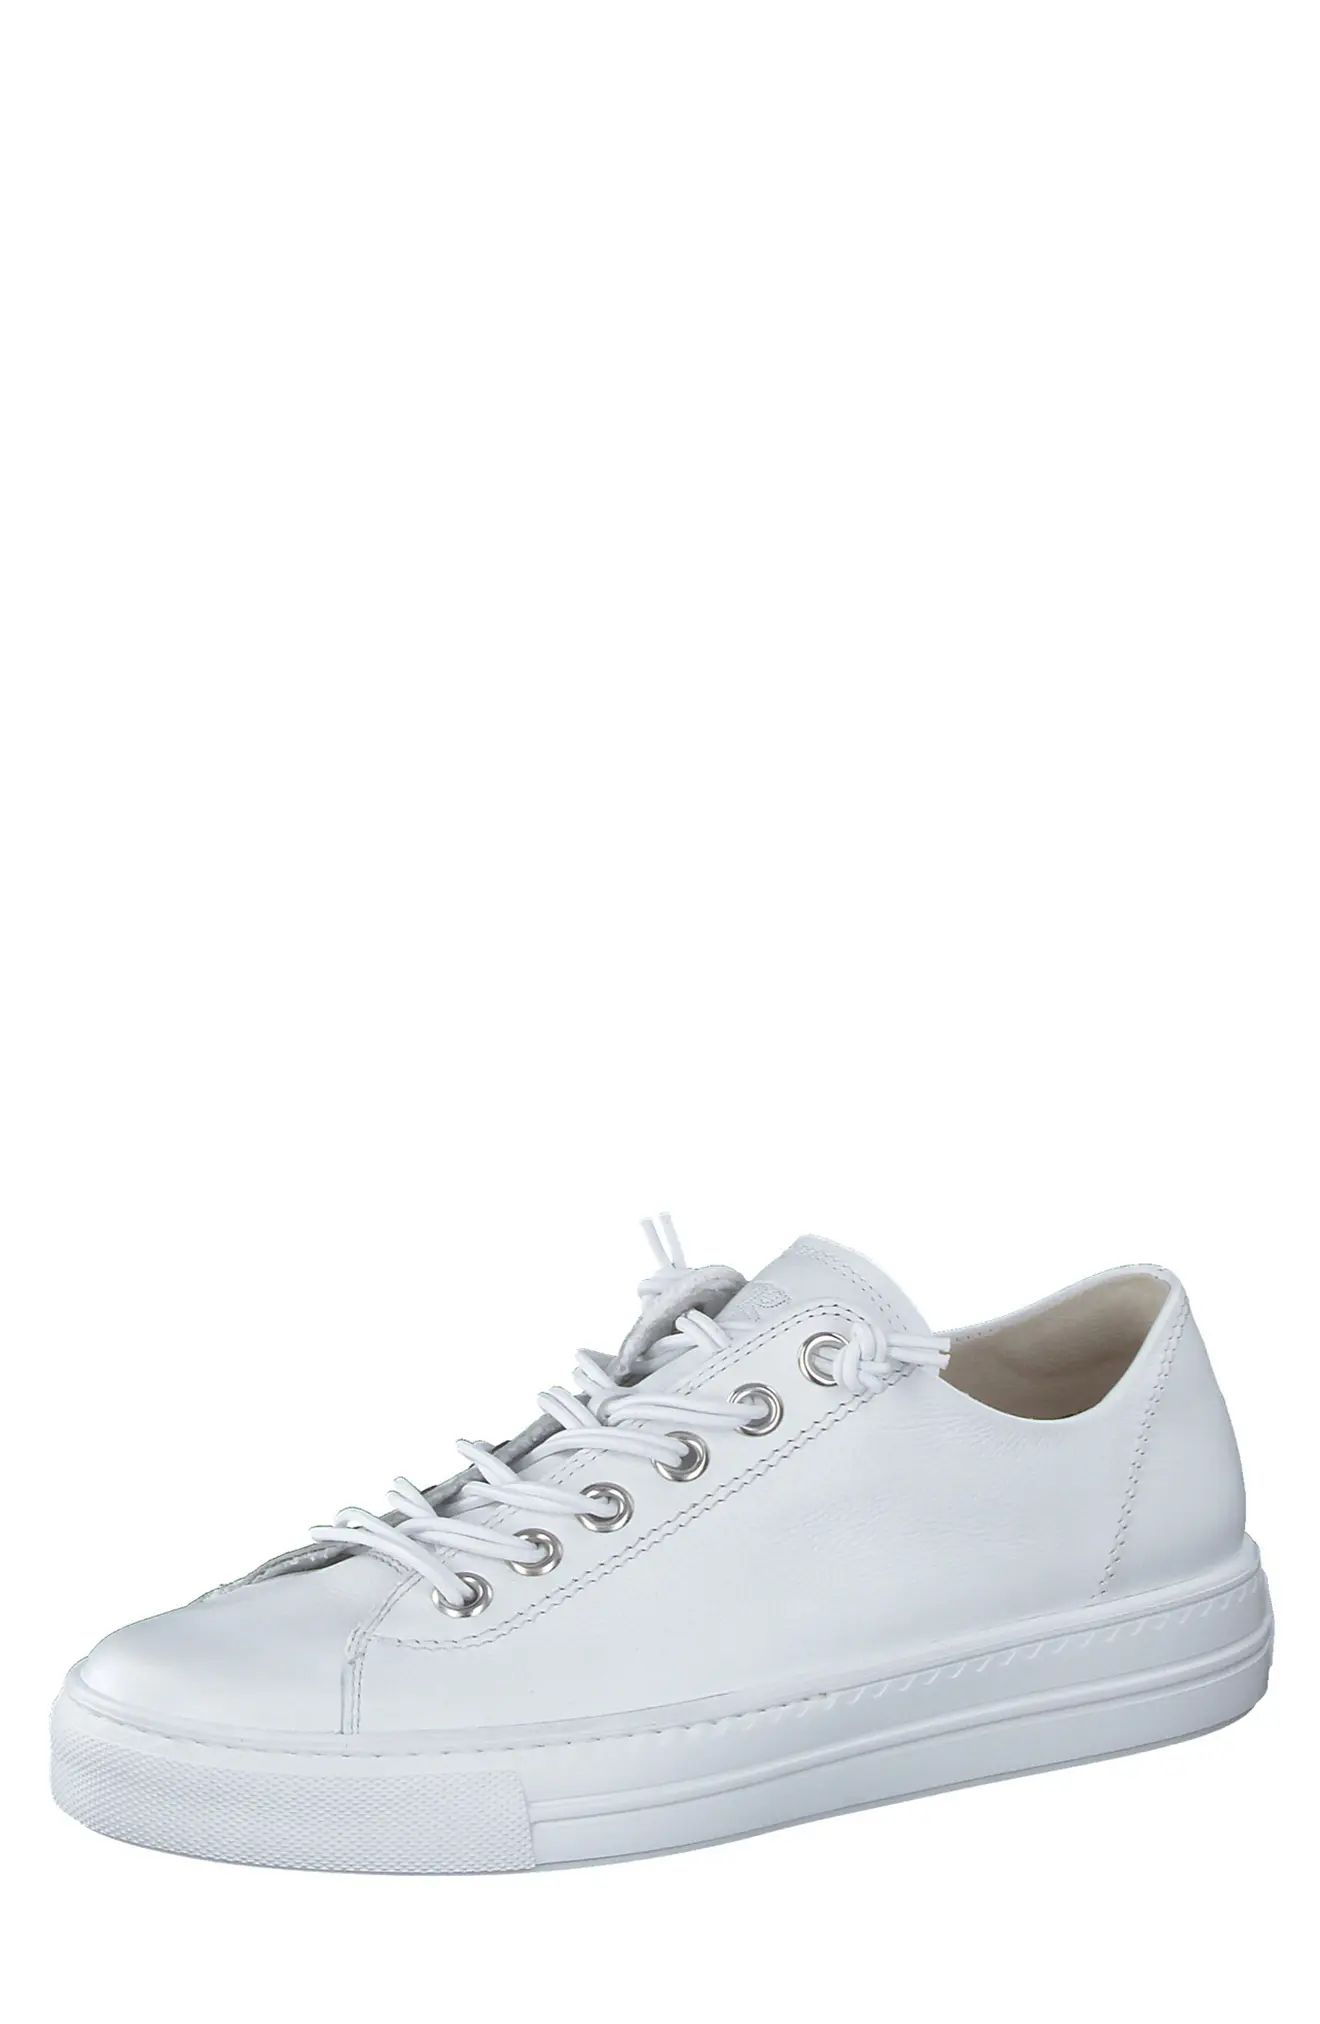 Paul Green Hadley Platform Sneaker in White Silver Mc Leather at Nordstrom, Size 6.5Us | Nordstrom